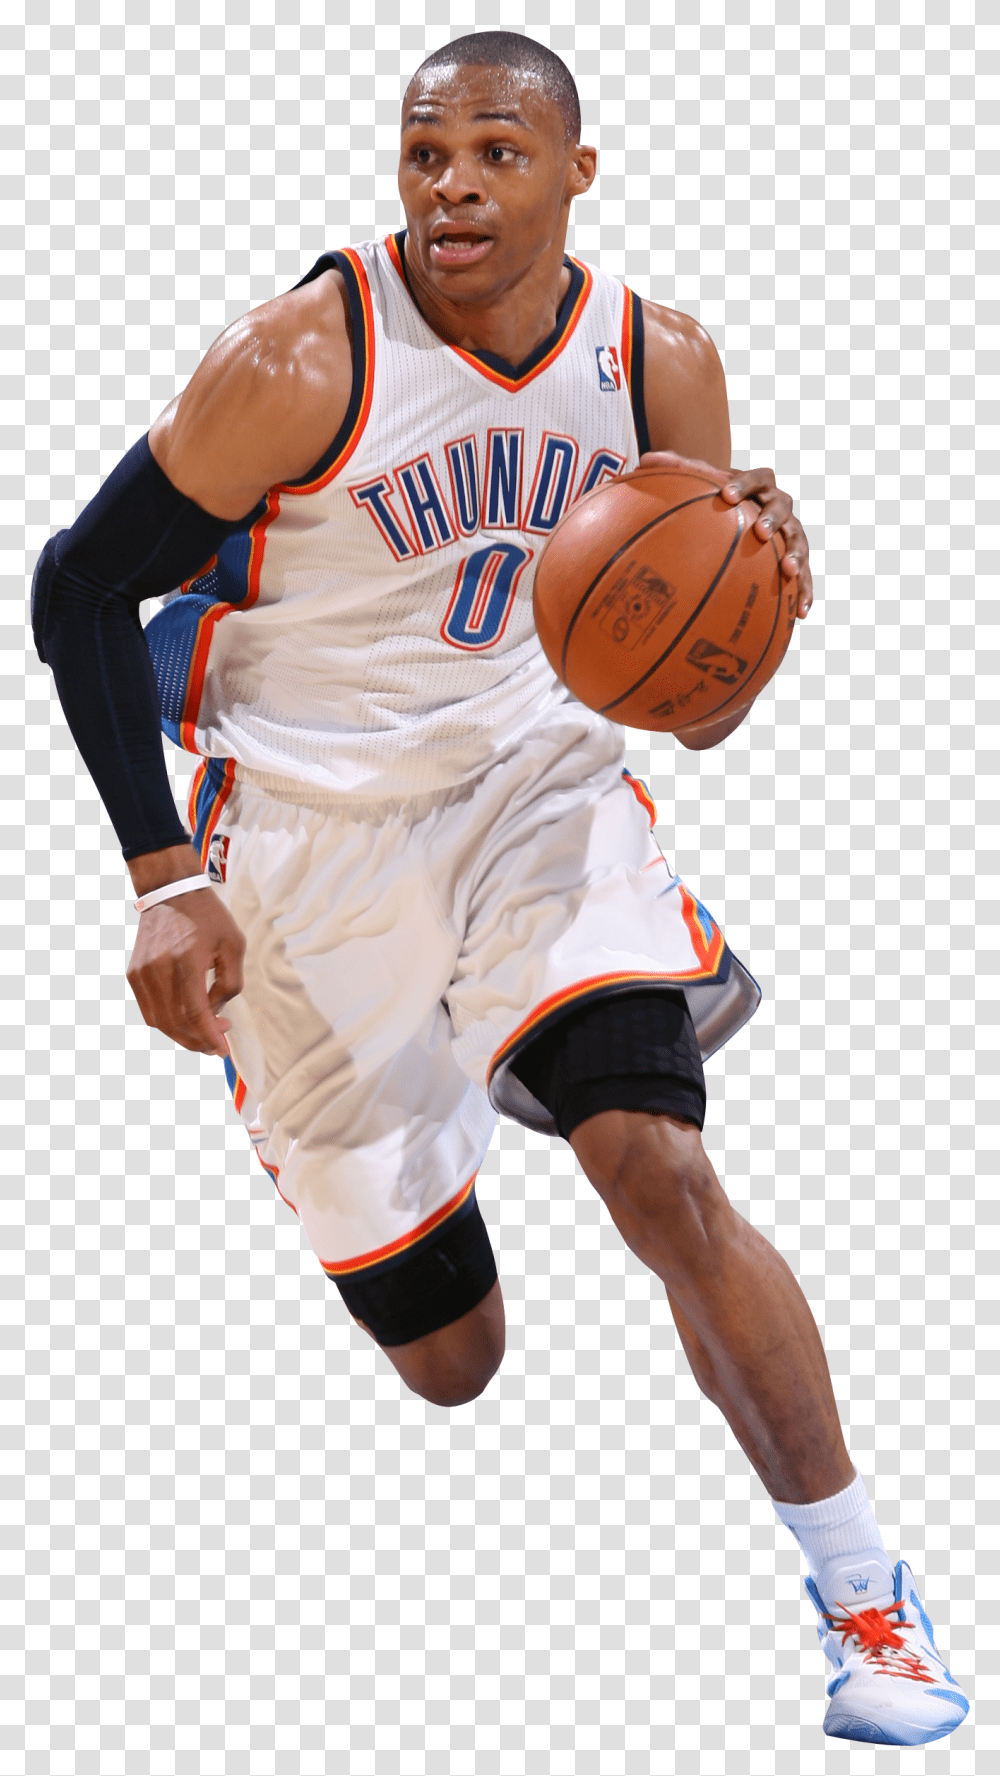 Download Basketball Player Jpg Russell Westbrook Dunk, Person, Human, People, Clothing Transparent Png